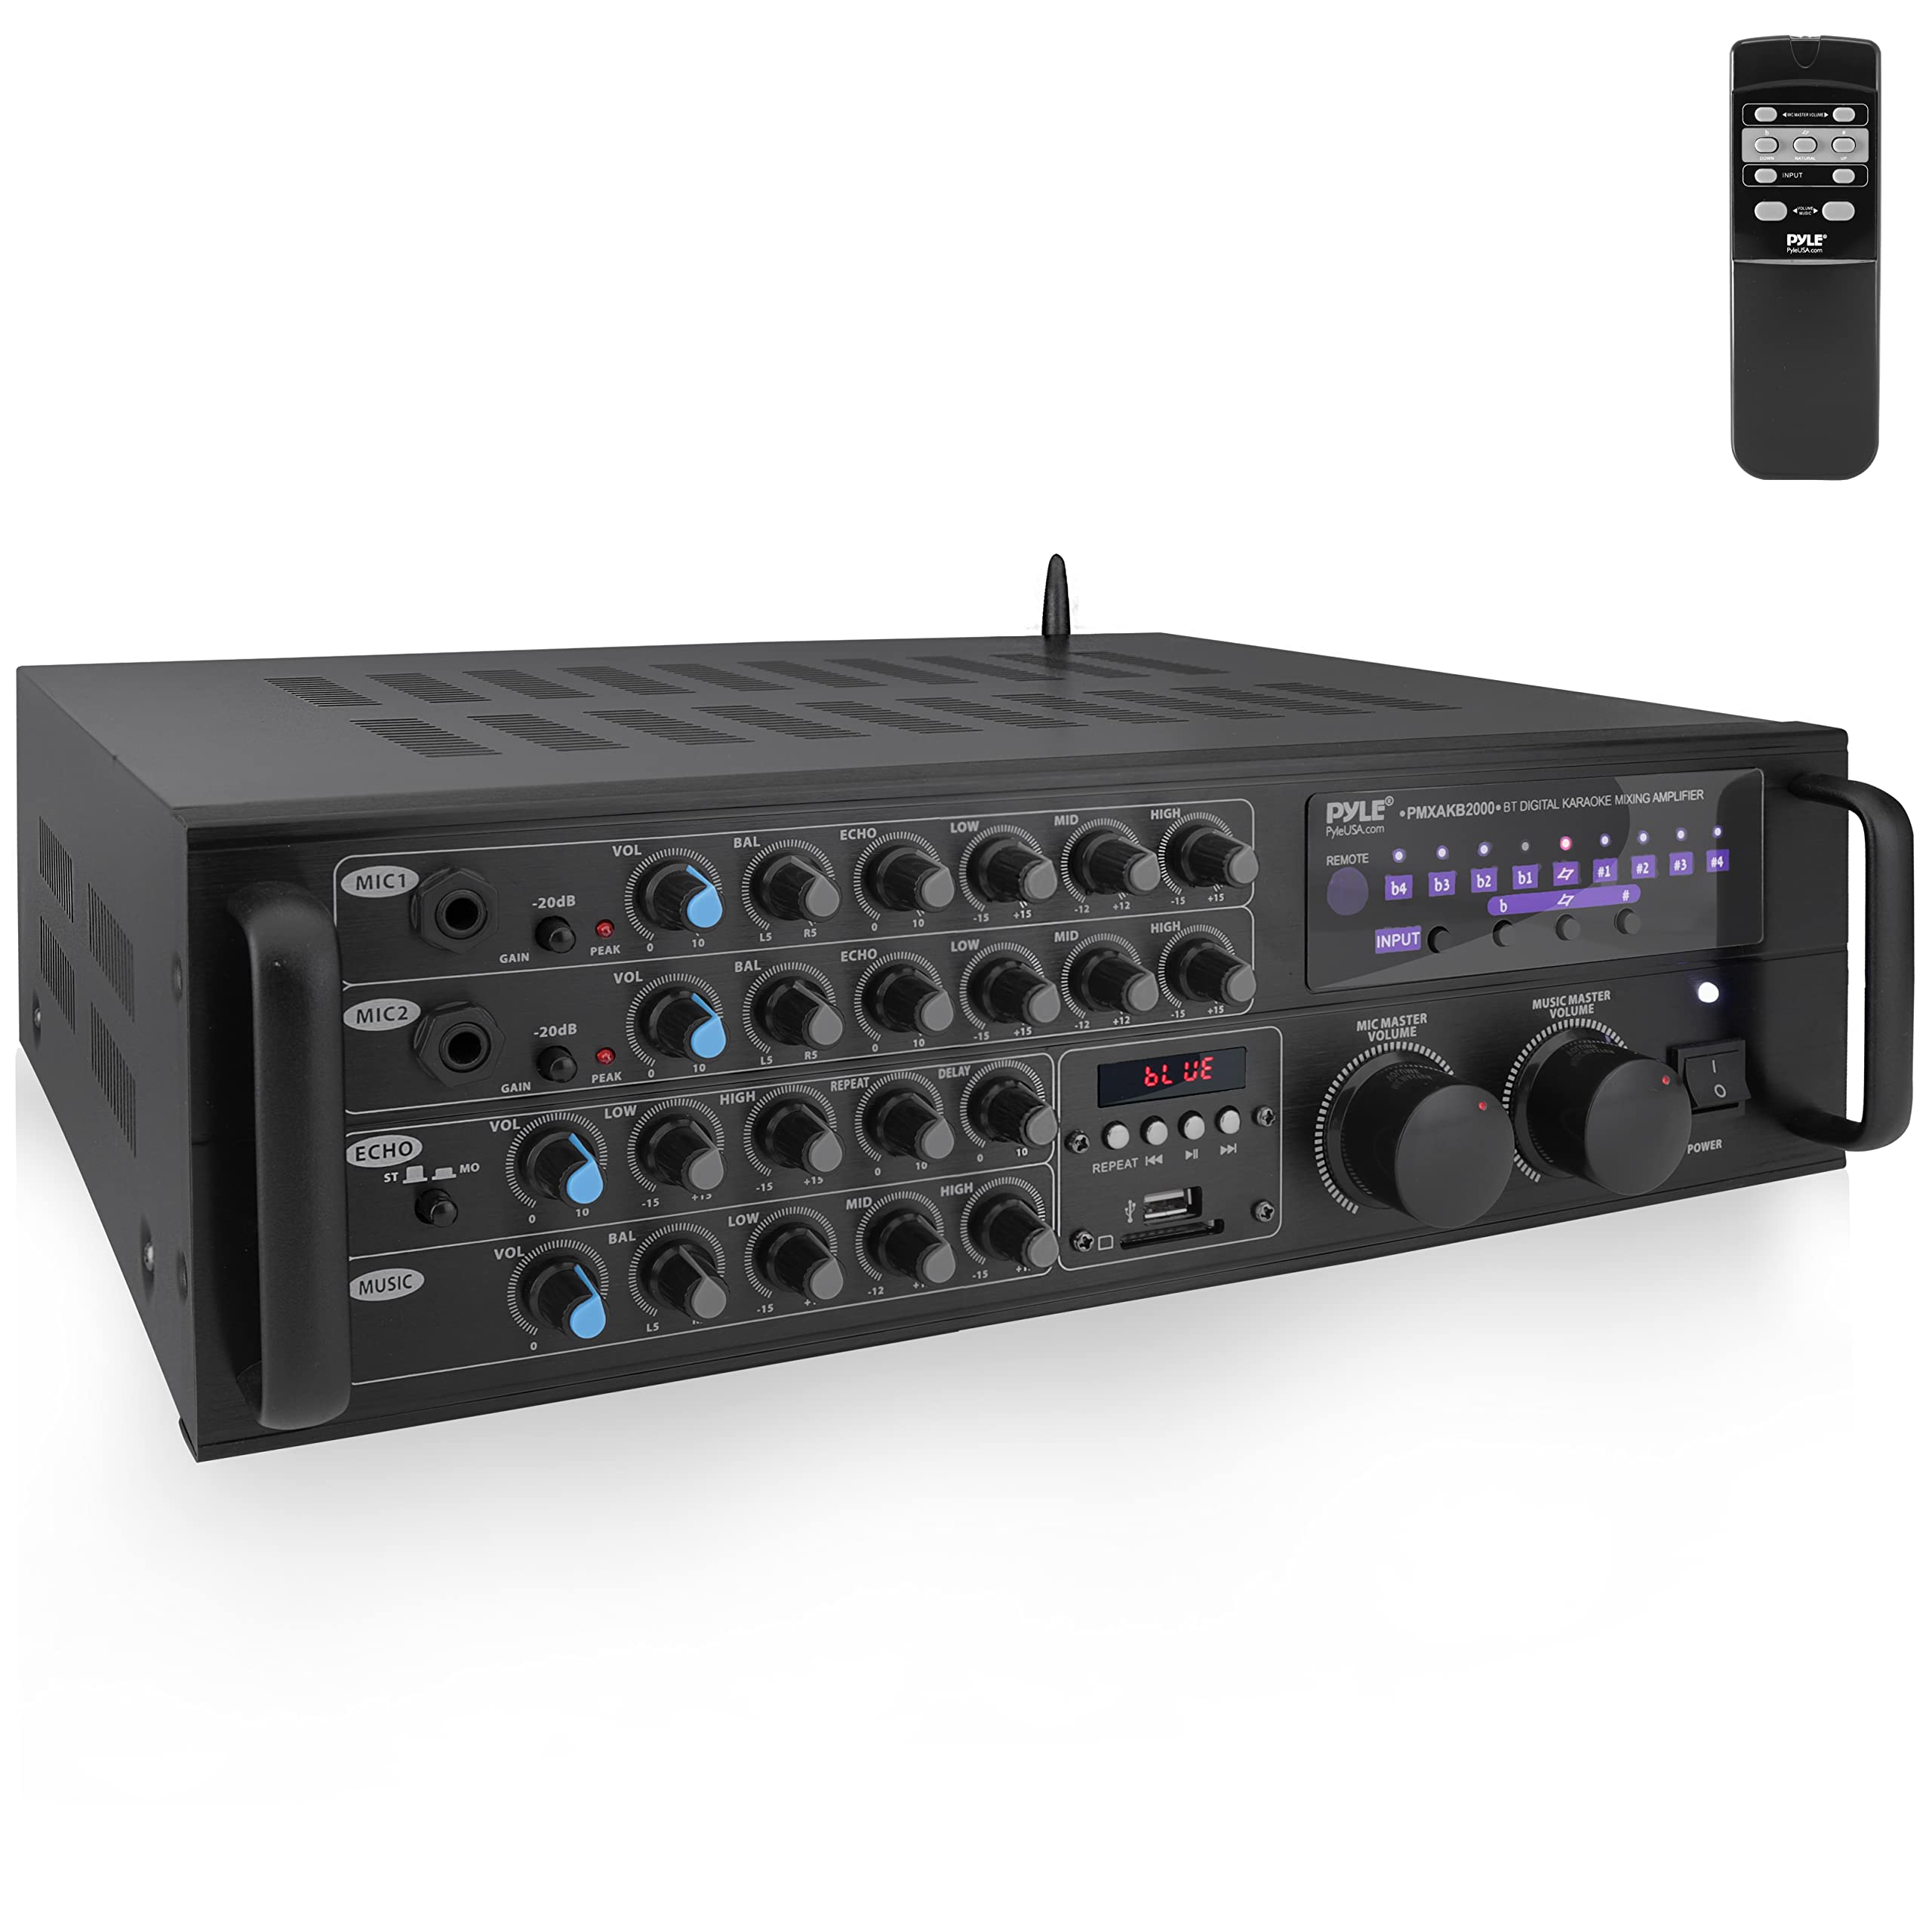  SereneLife Dual Channel Bluetooth Mixing Amplifier - 2000W Rack Mount Karaoke Sound Mixer Audio Home Stereo Receiver Box System w/ RCA, USB, AUX - For Speaker, PA, Home Theater, Studio/Stage - Pyle...